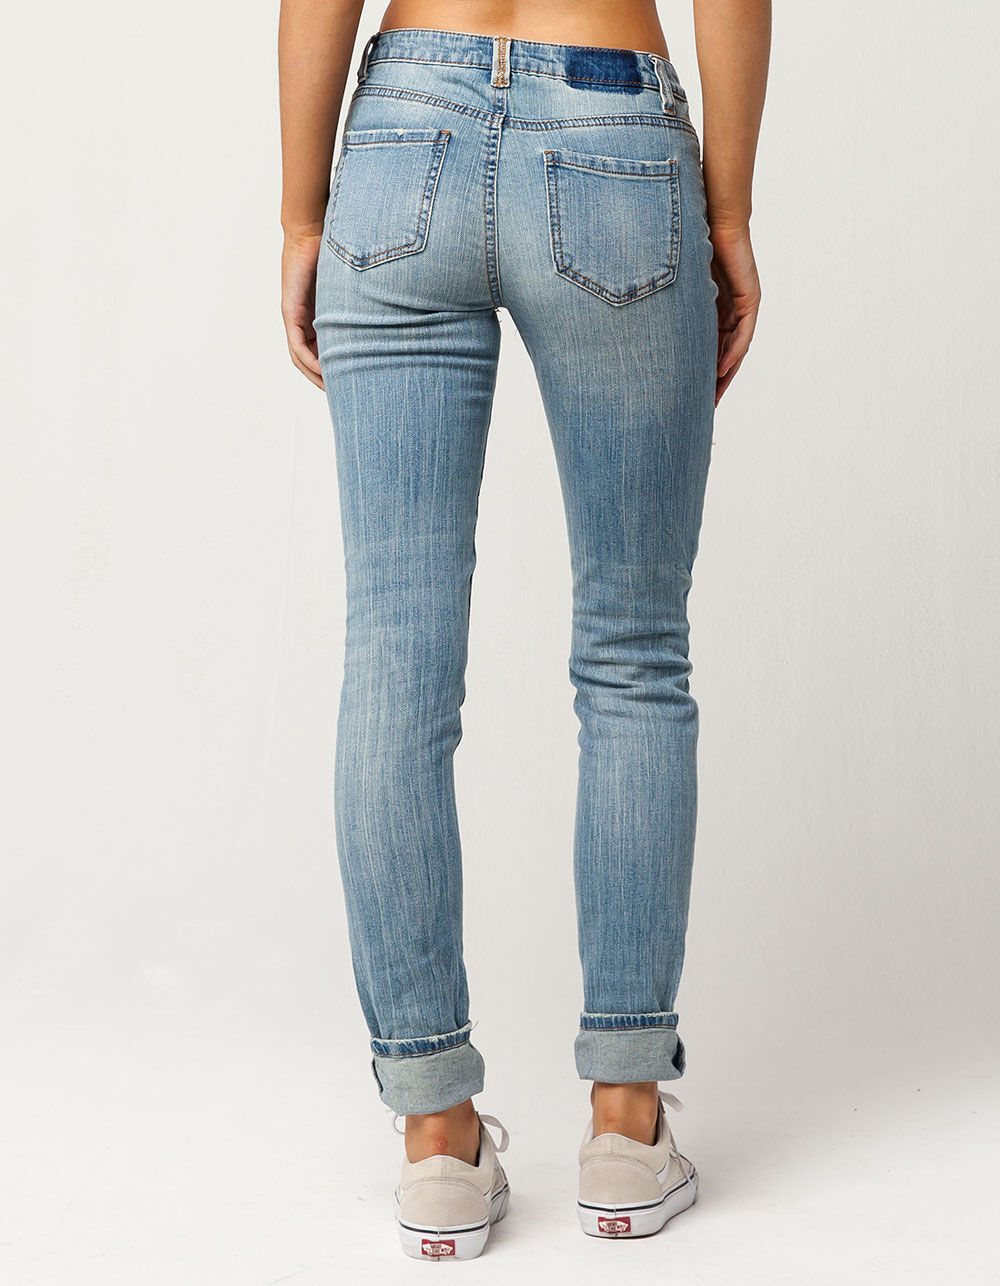 ALMOST FAMOUS Premium Cuffed Womens Skinny Jeans - LTBLA | Tillys